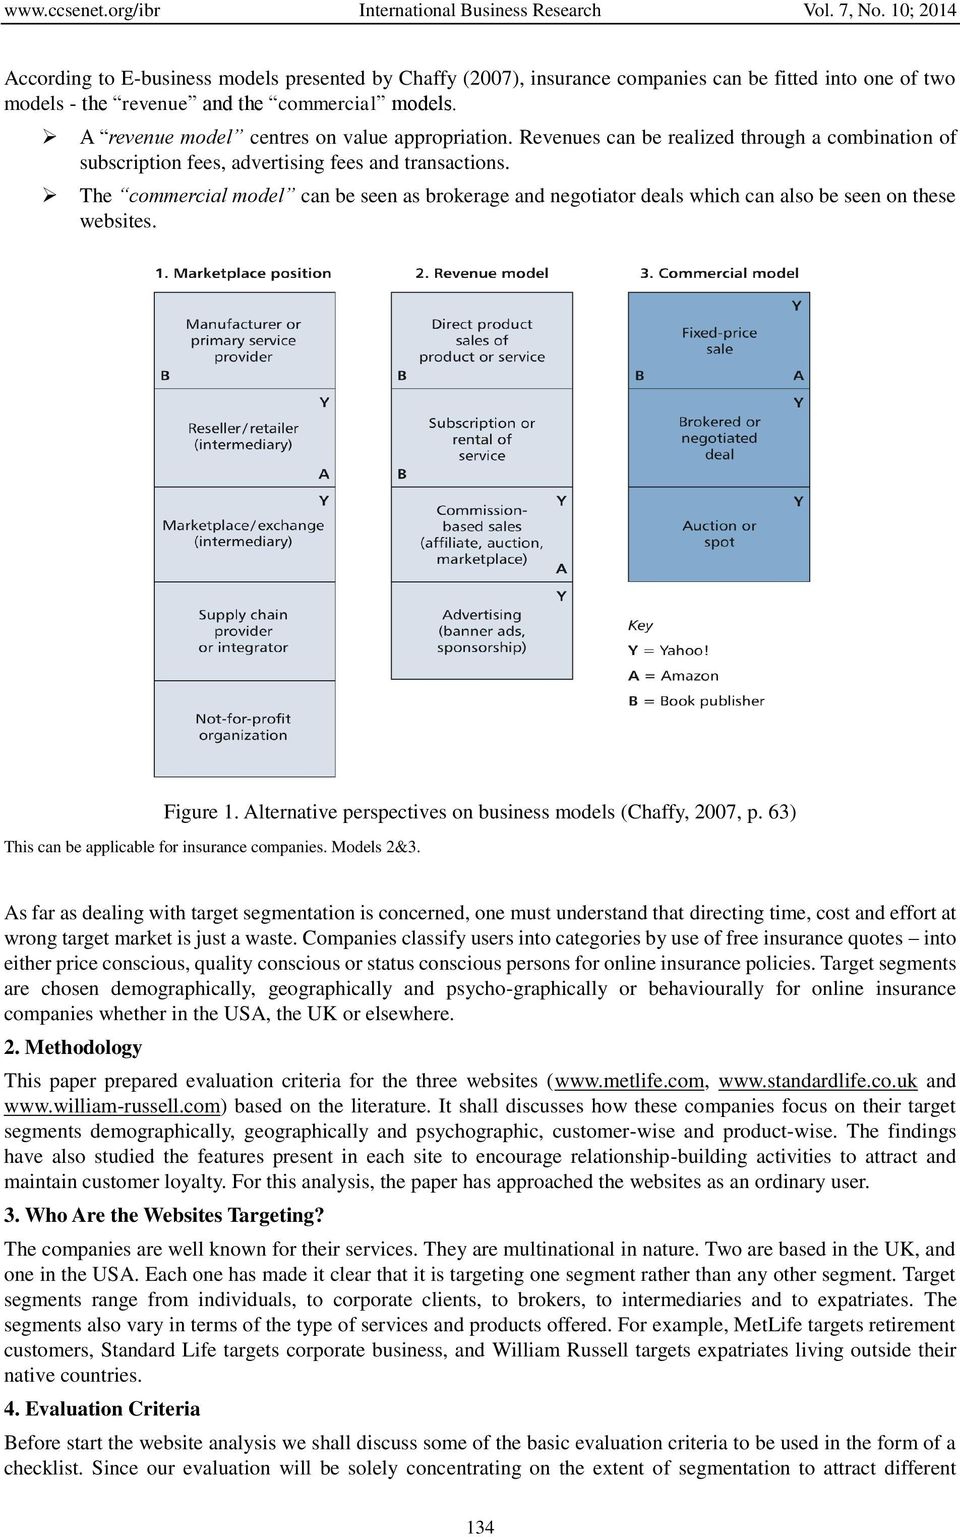 The commercial model can be seen as brokerage and negotiator deals which can also be seen on these websites. Figure 1. Alternative perspectives on business models (Chaffy, 2007, p.